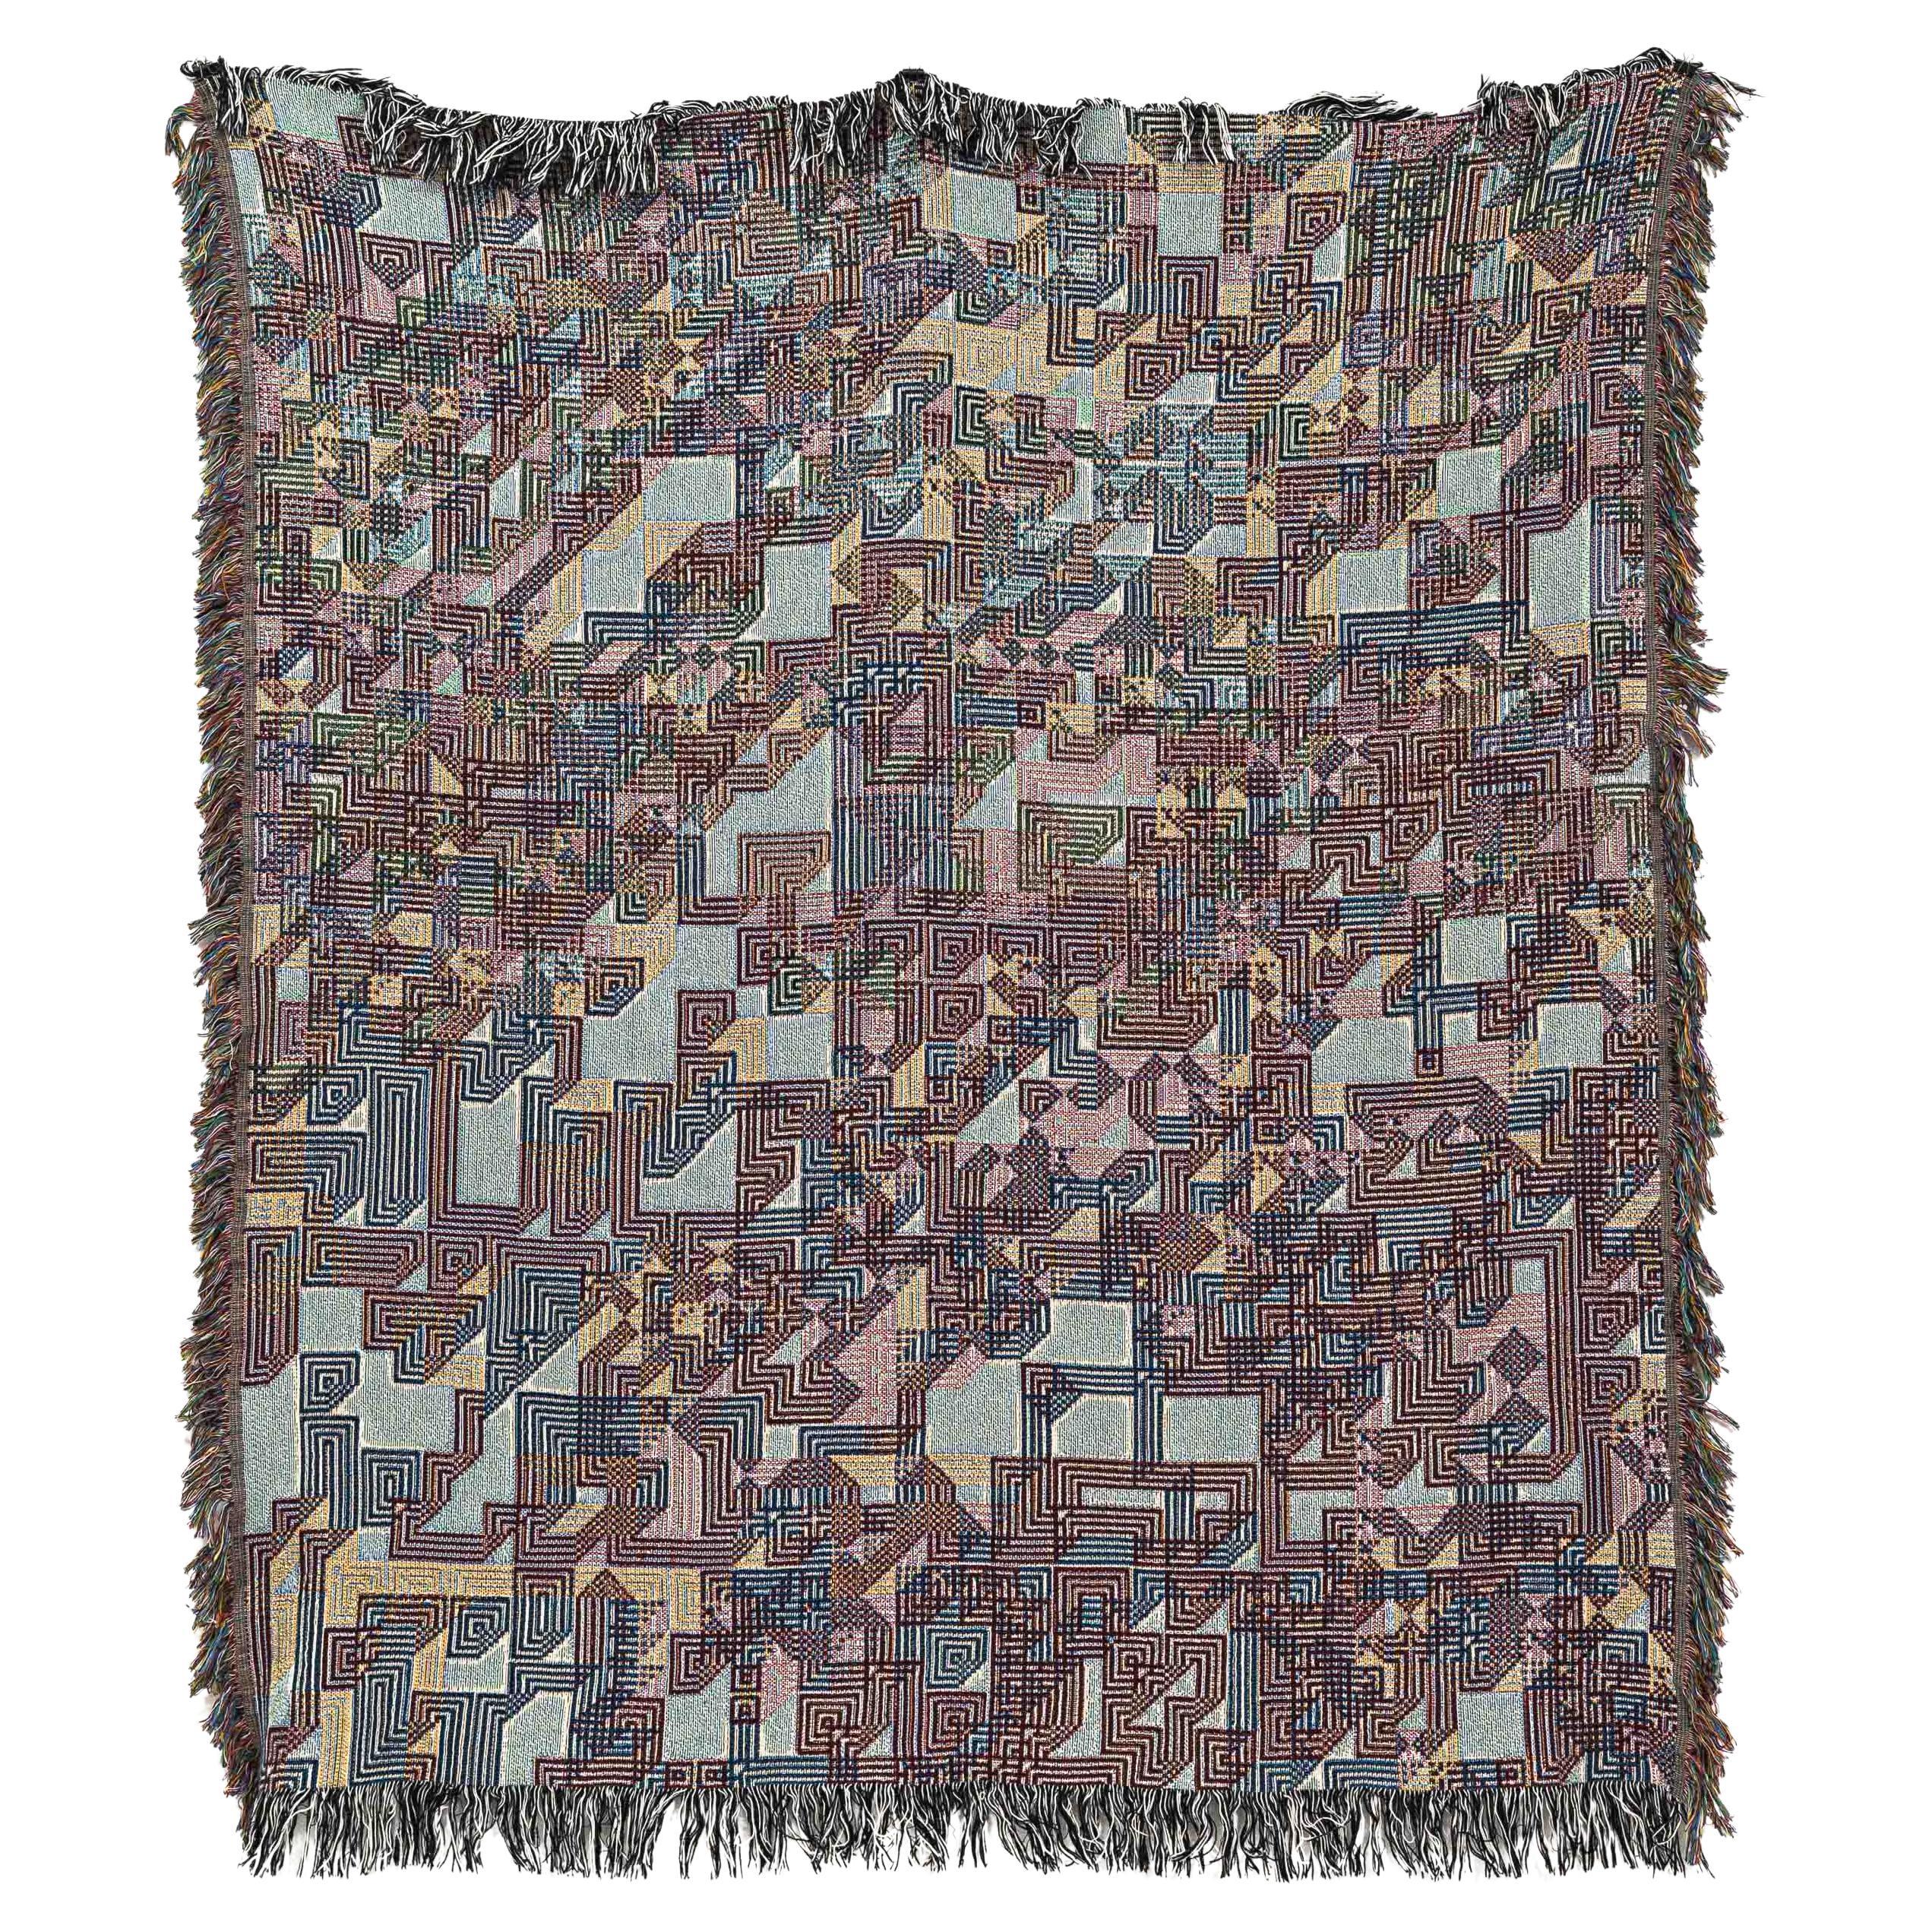 Bit Map Series 02, Multicolor Modern Graphic Woven Wall Tapestry & Throw Blanket